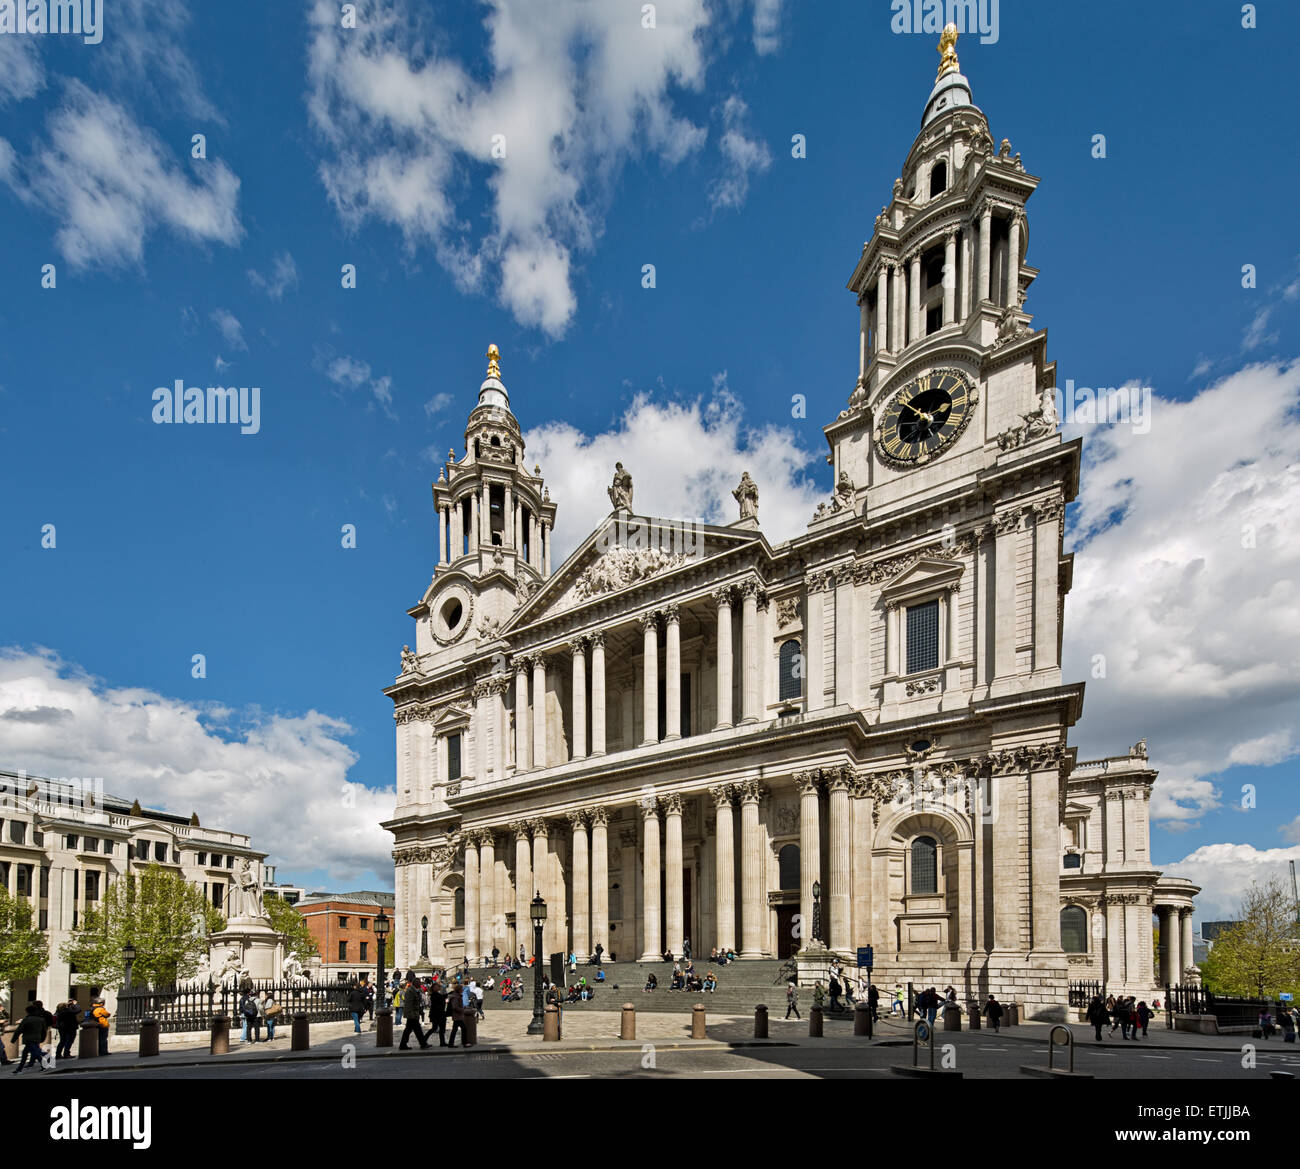 St Paul's Cathedral in London designed by Sir Christopher Wren Stock Photo